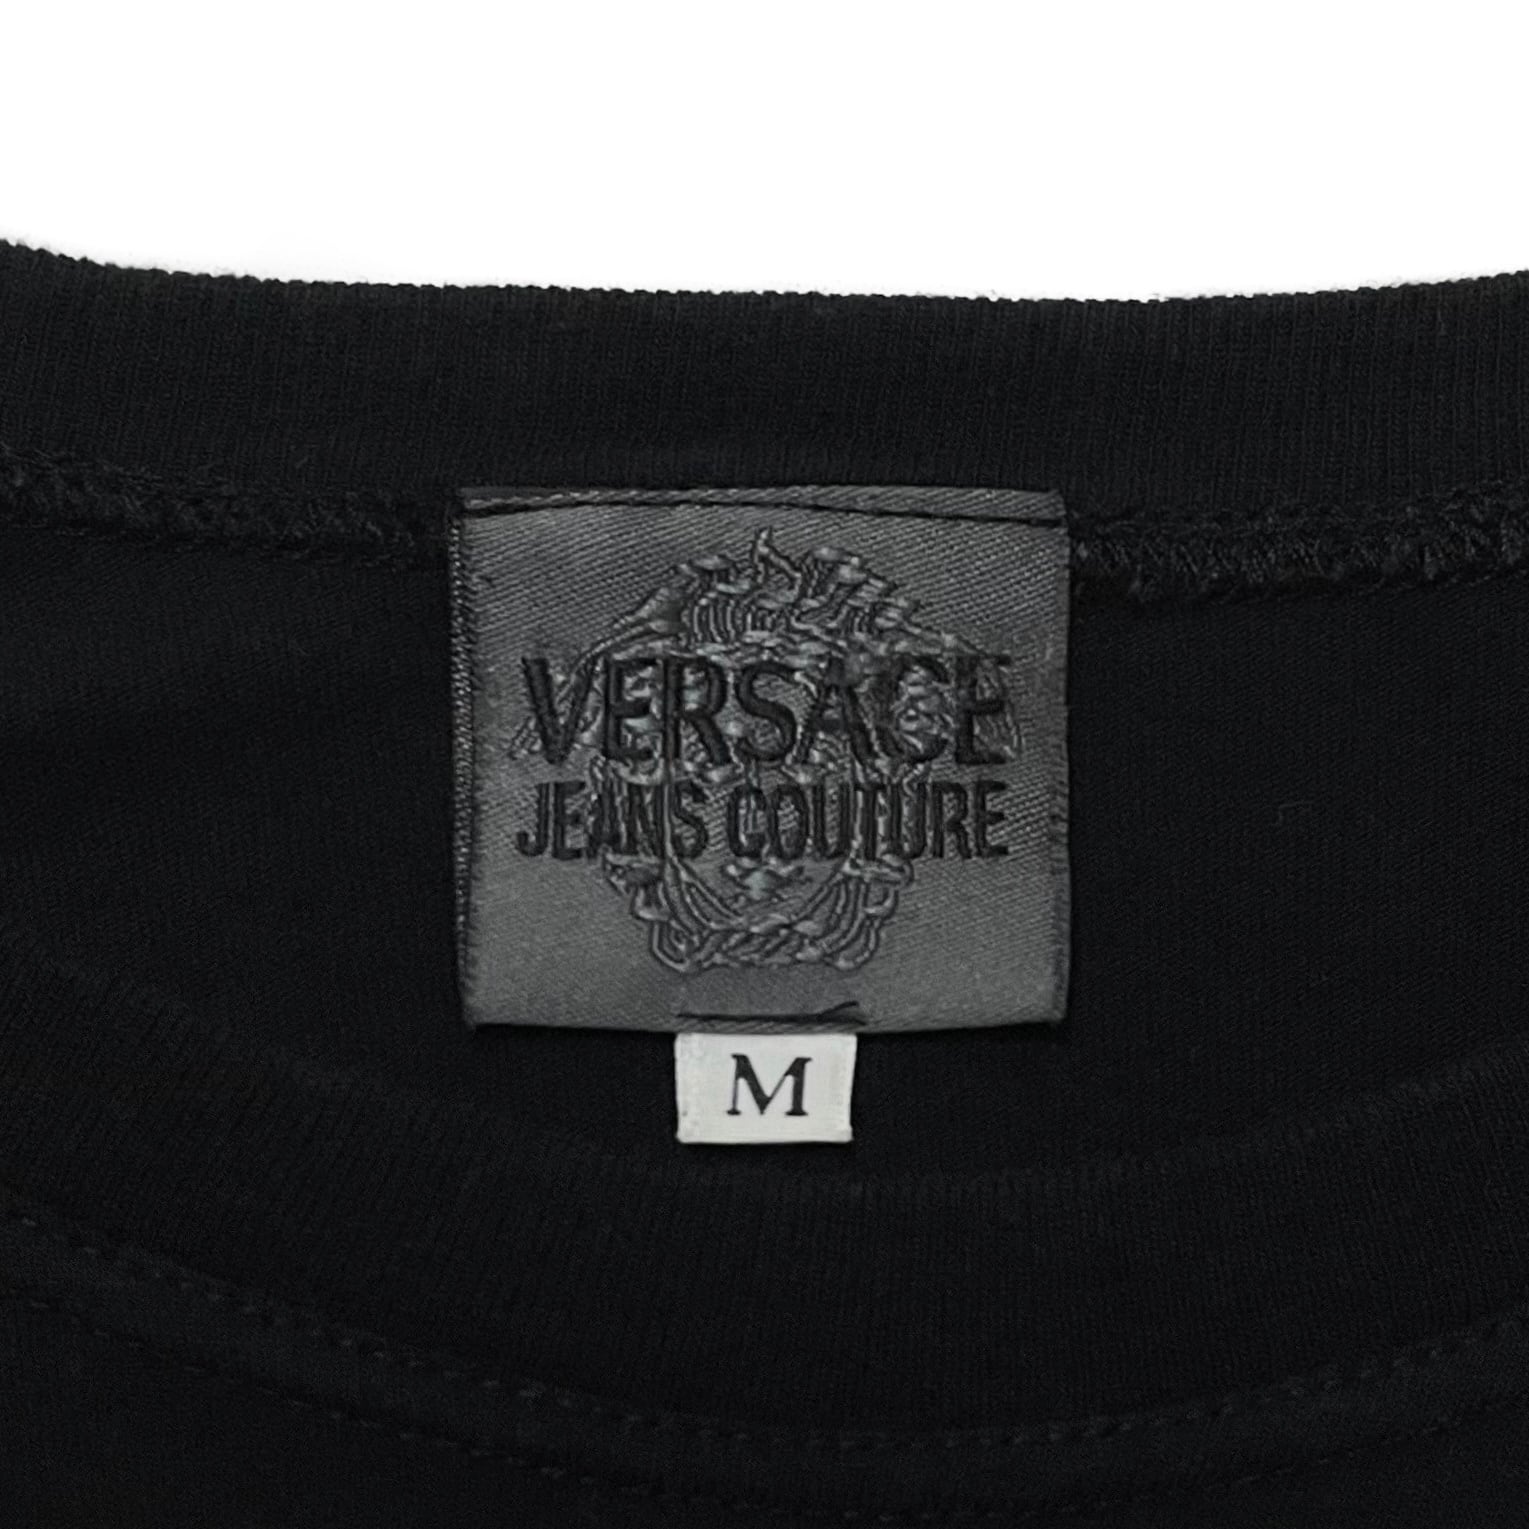 VERSACE JEANS COUTURE / 90s black shirts